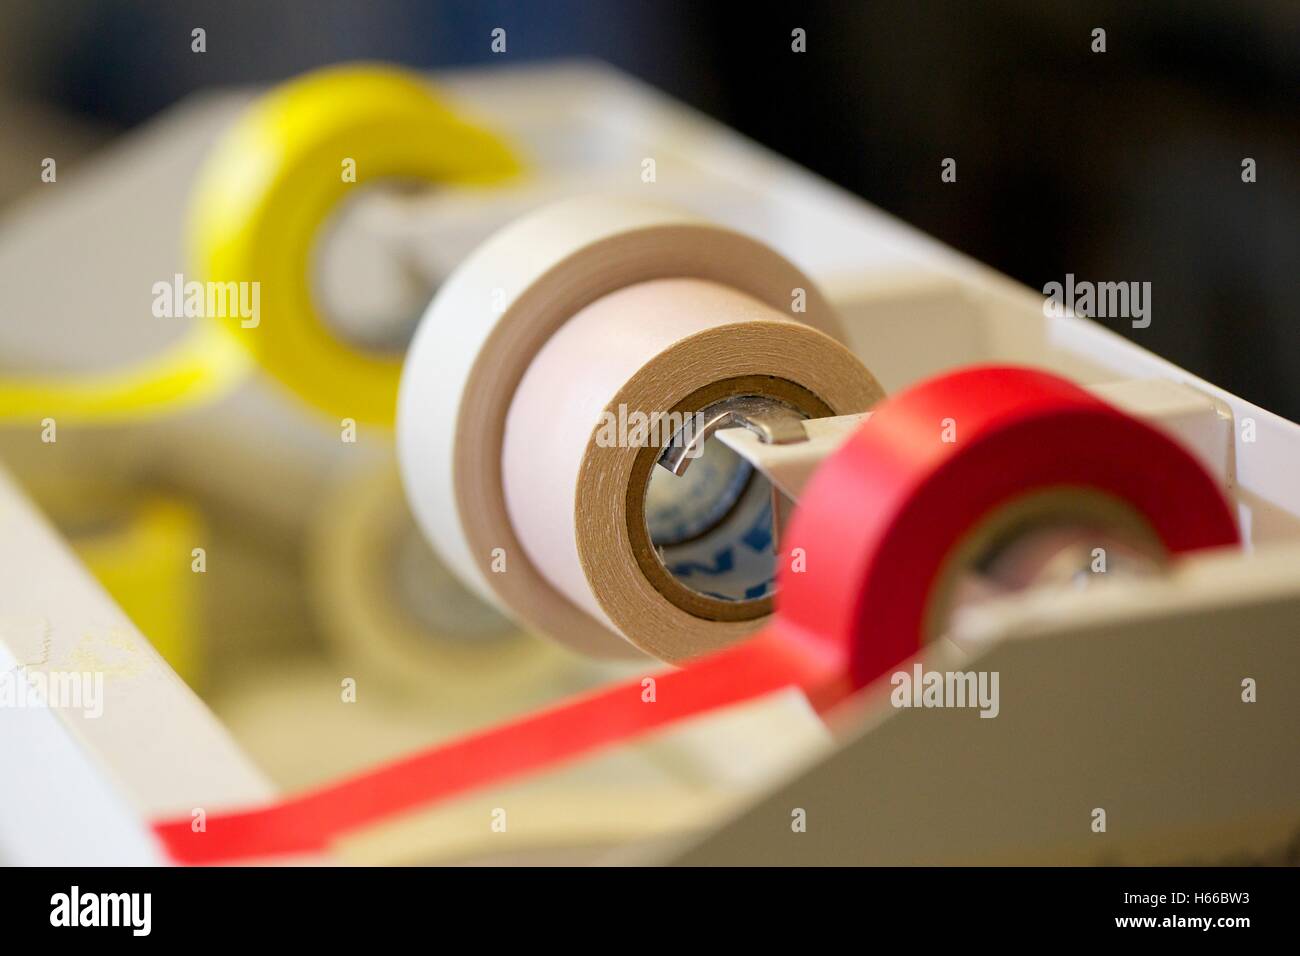 Laboratory label tape. Different colors used to color code labels. Stock Photo